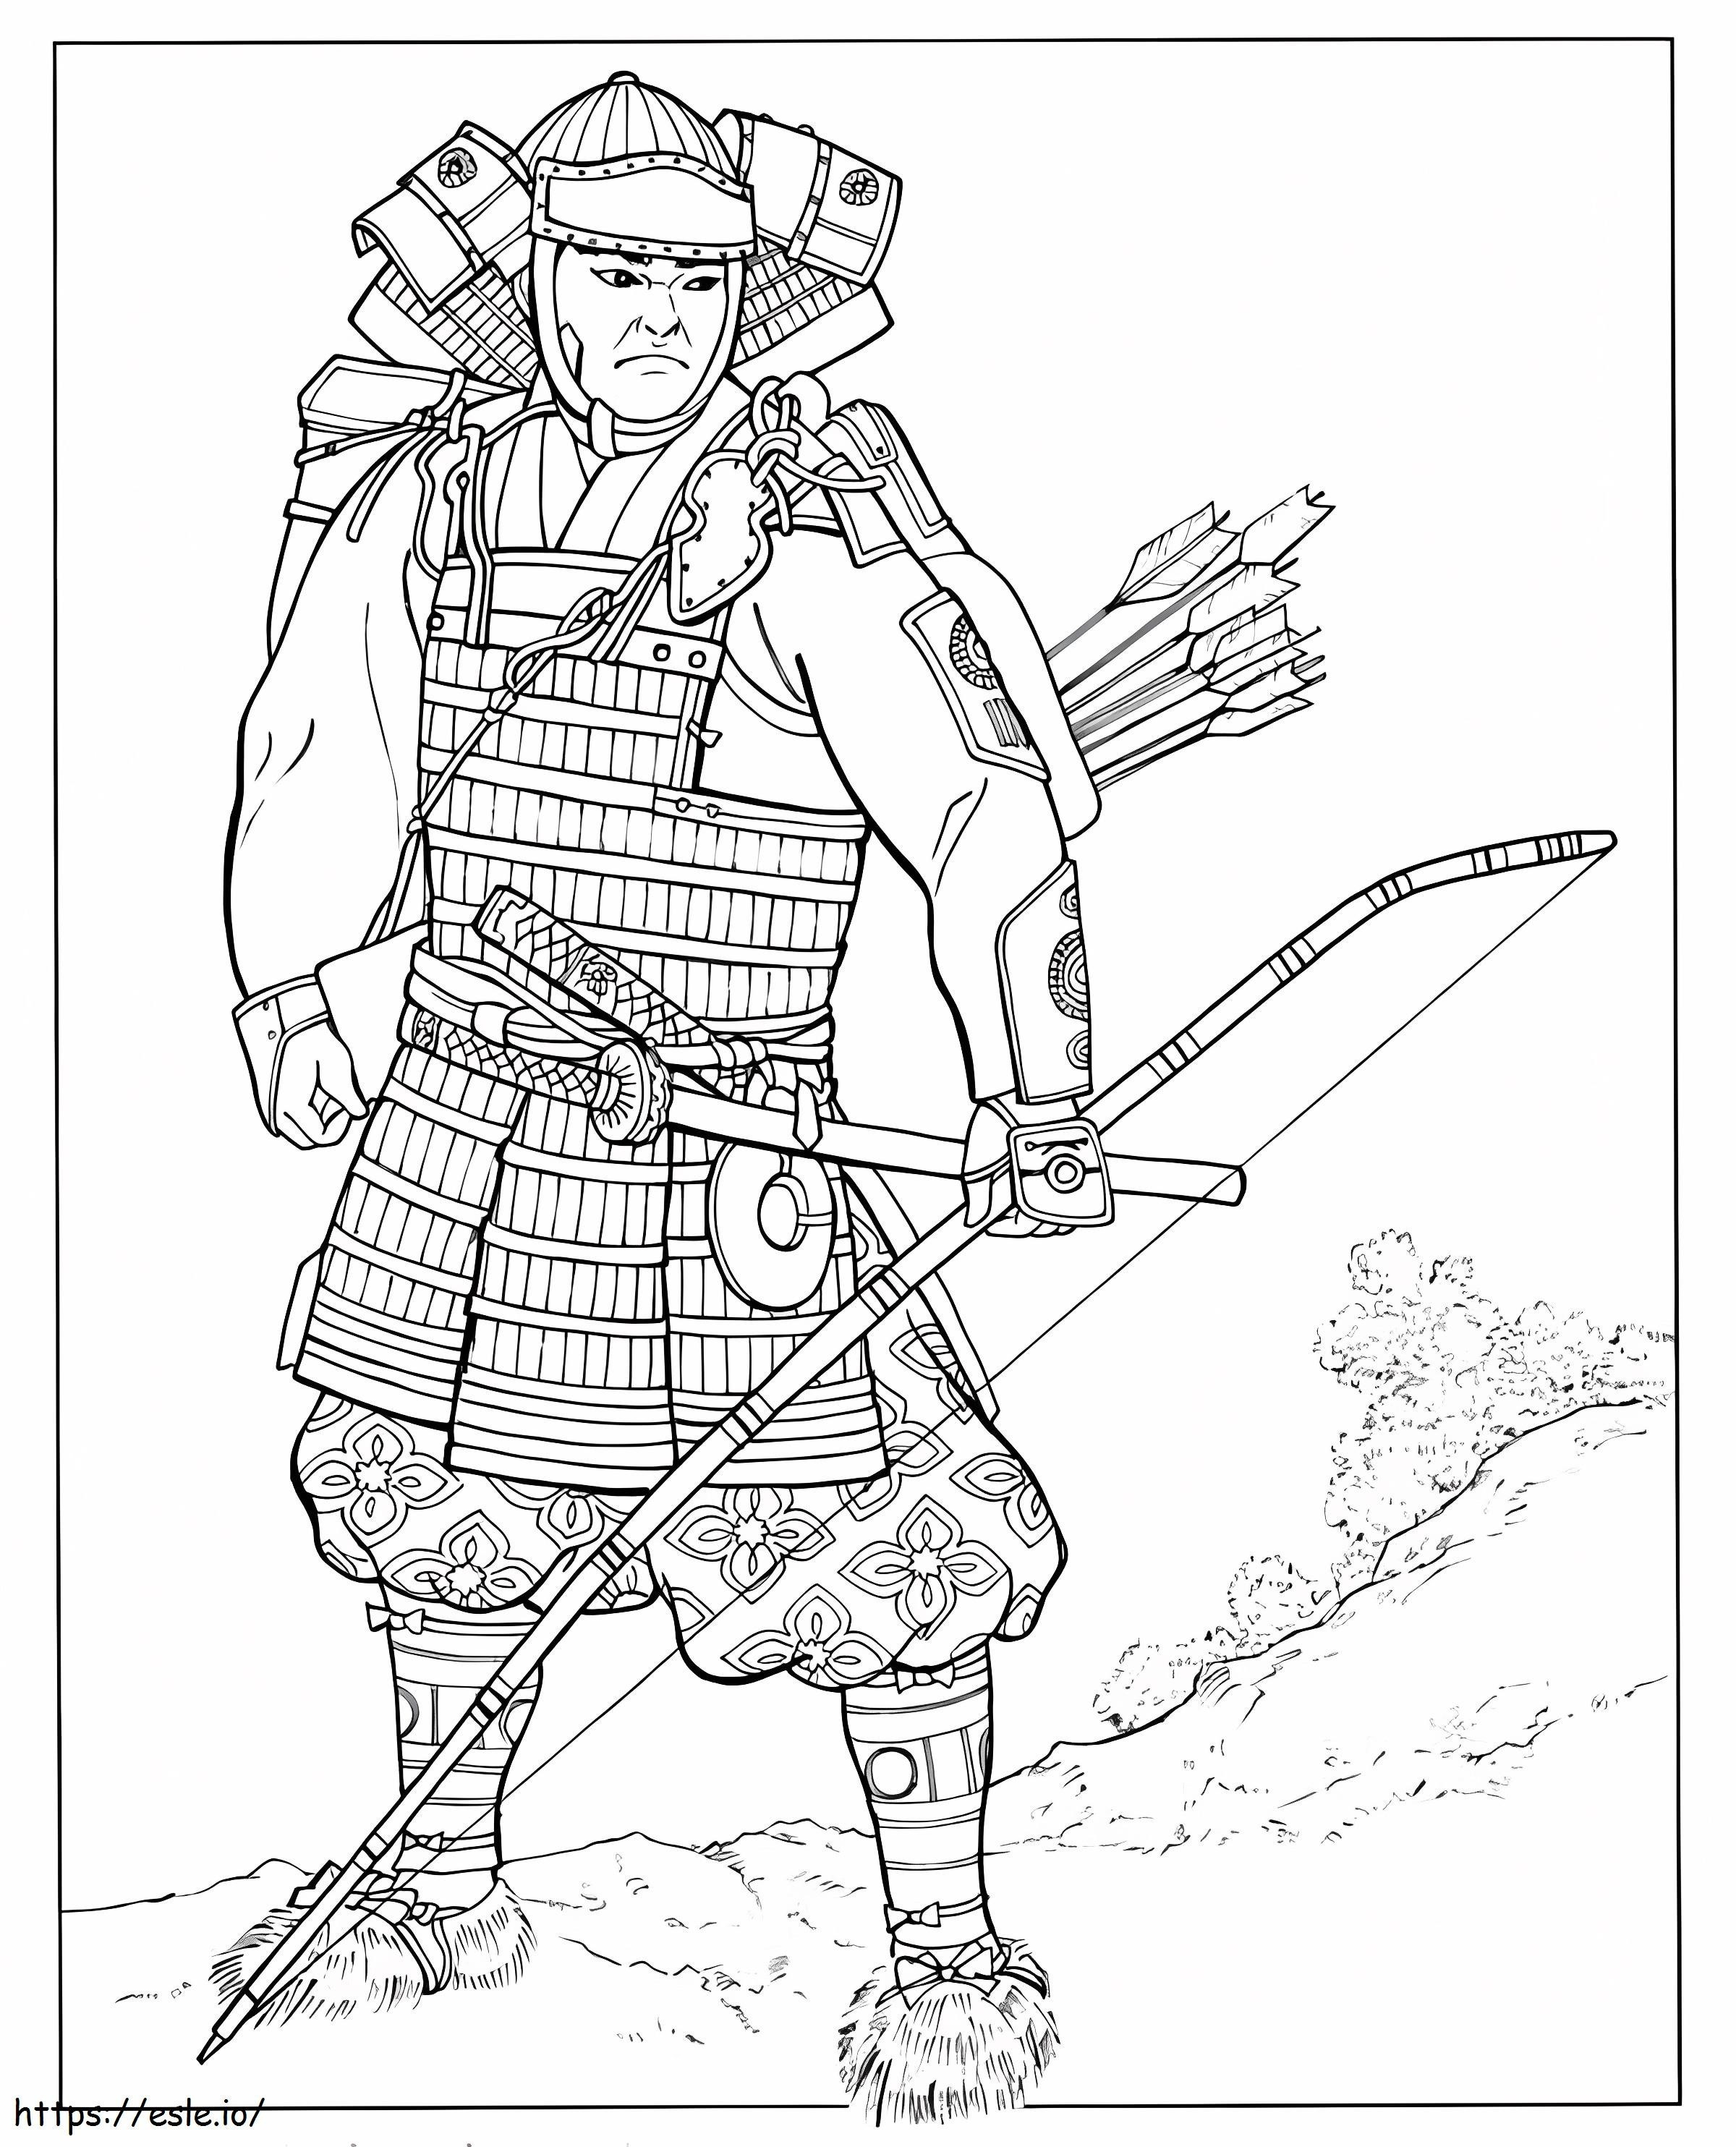 Samurai Holding A Bow coloring page